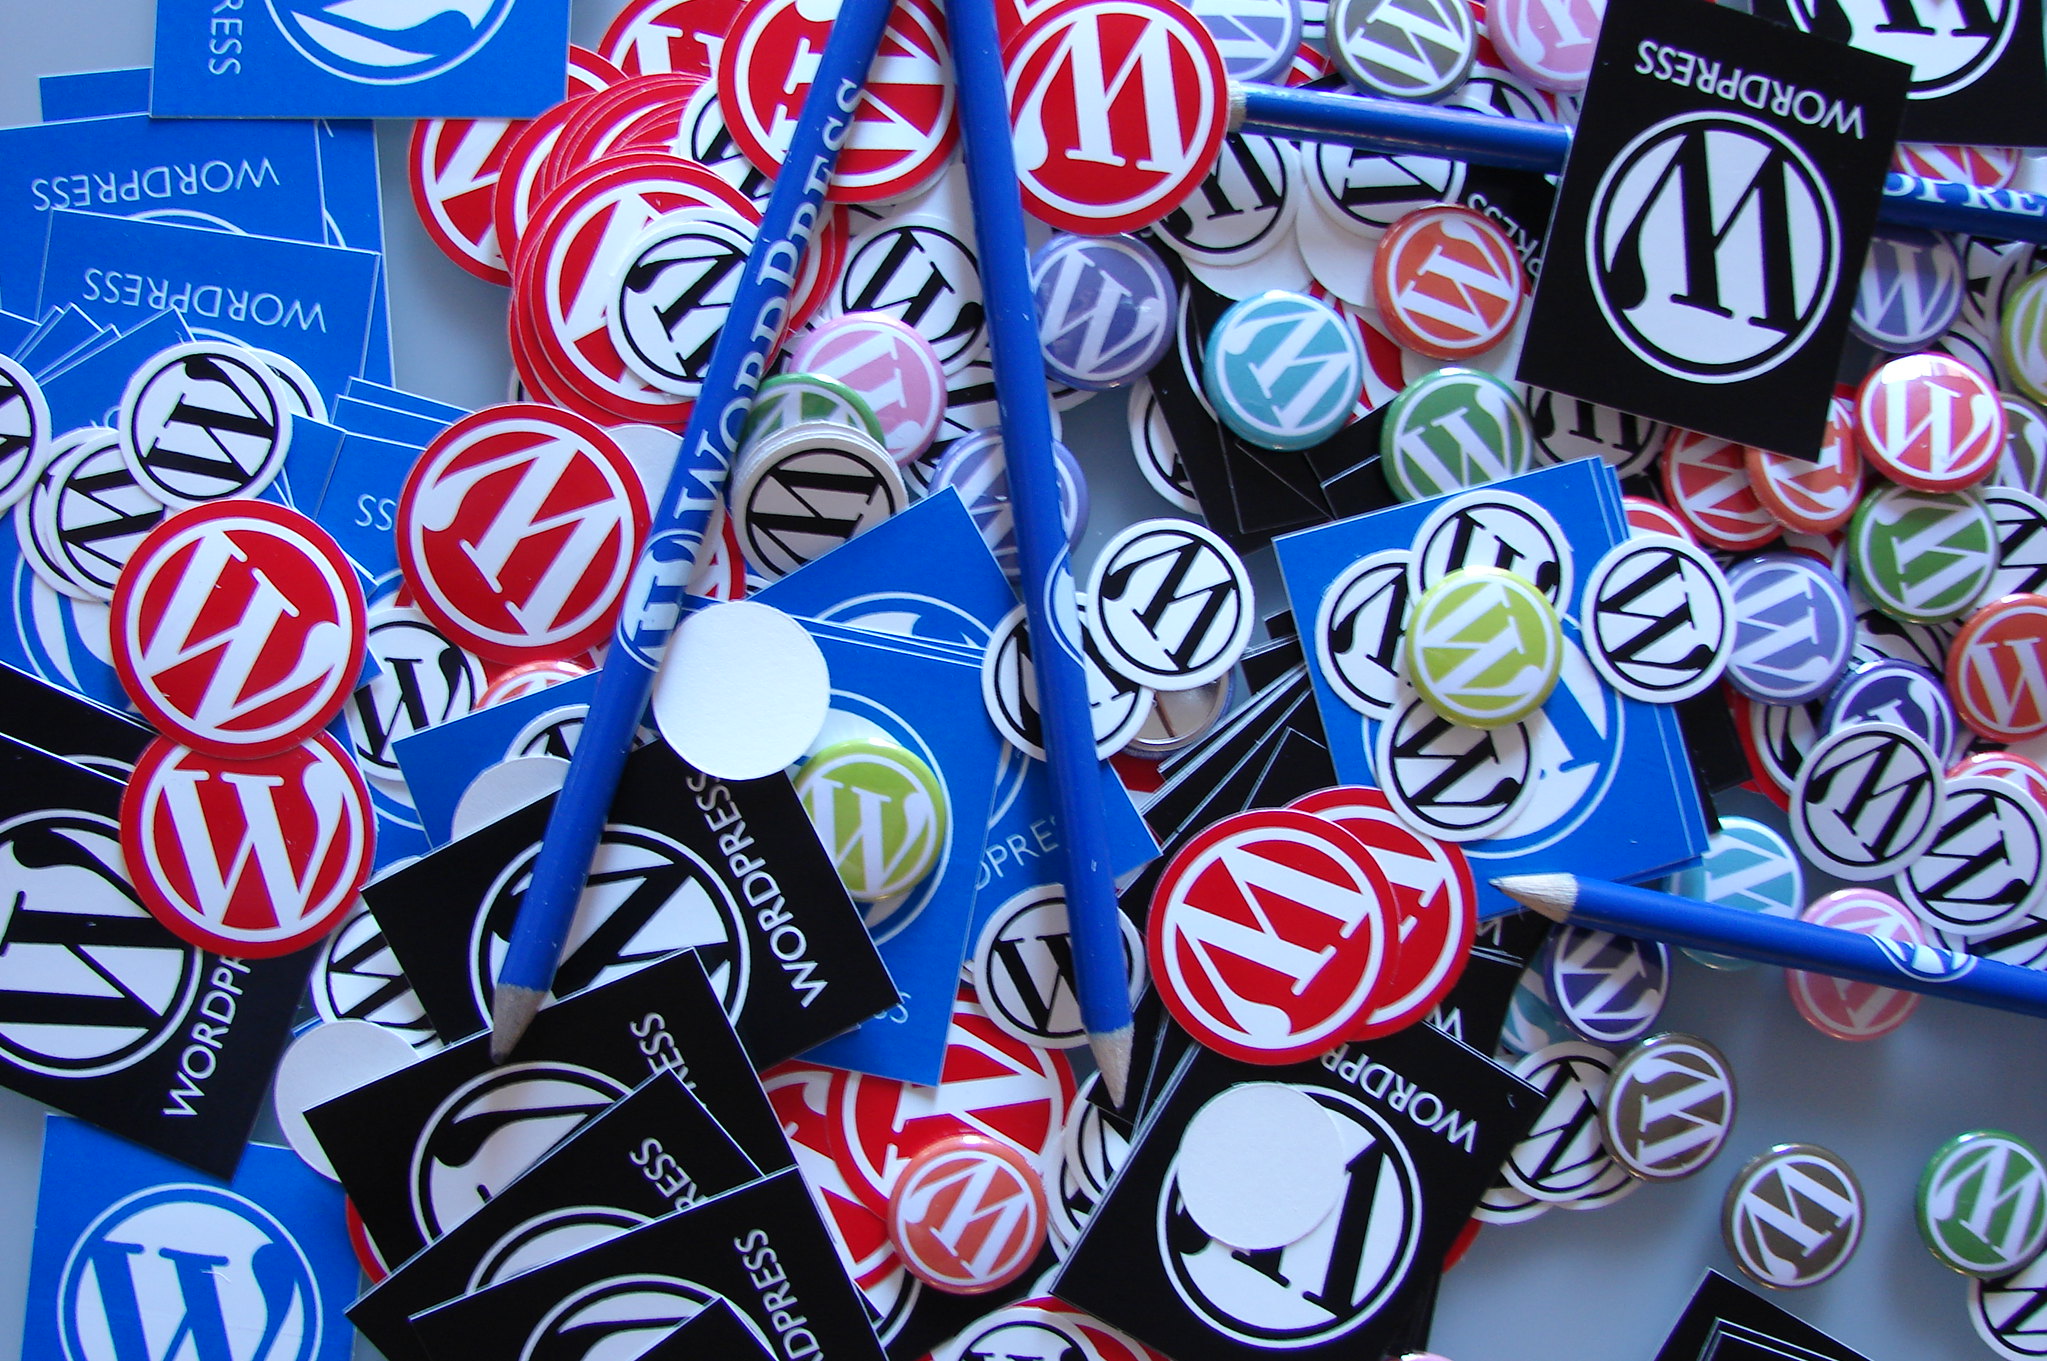 WordPress Opens Applications for In-Person WordCamps